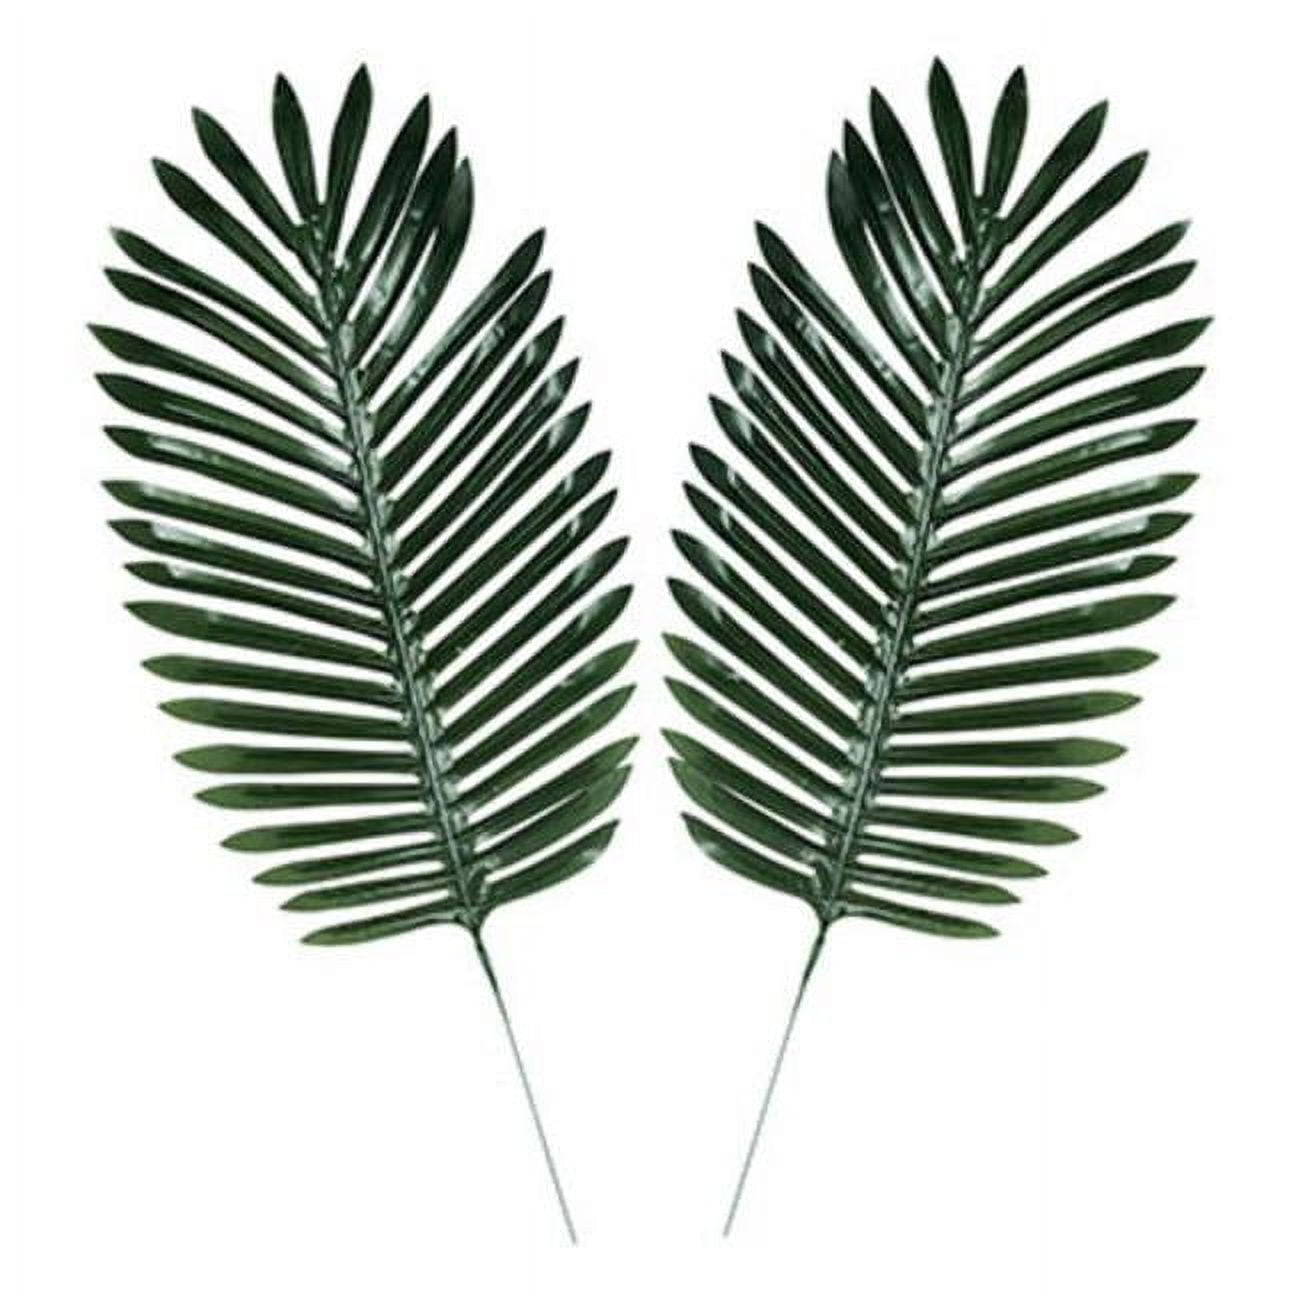 Picture of Beistle 53786 Fabric Fern Palm Leaves - Pack of 6